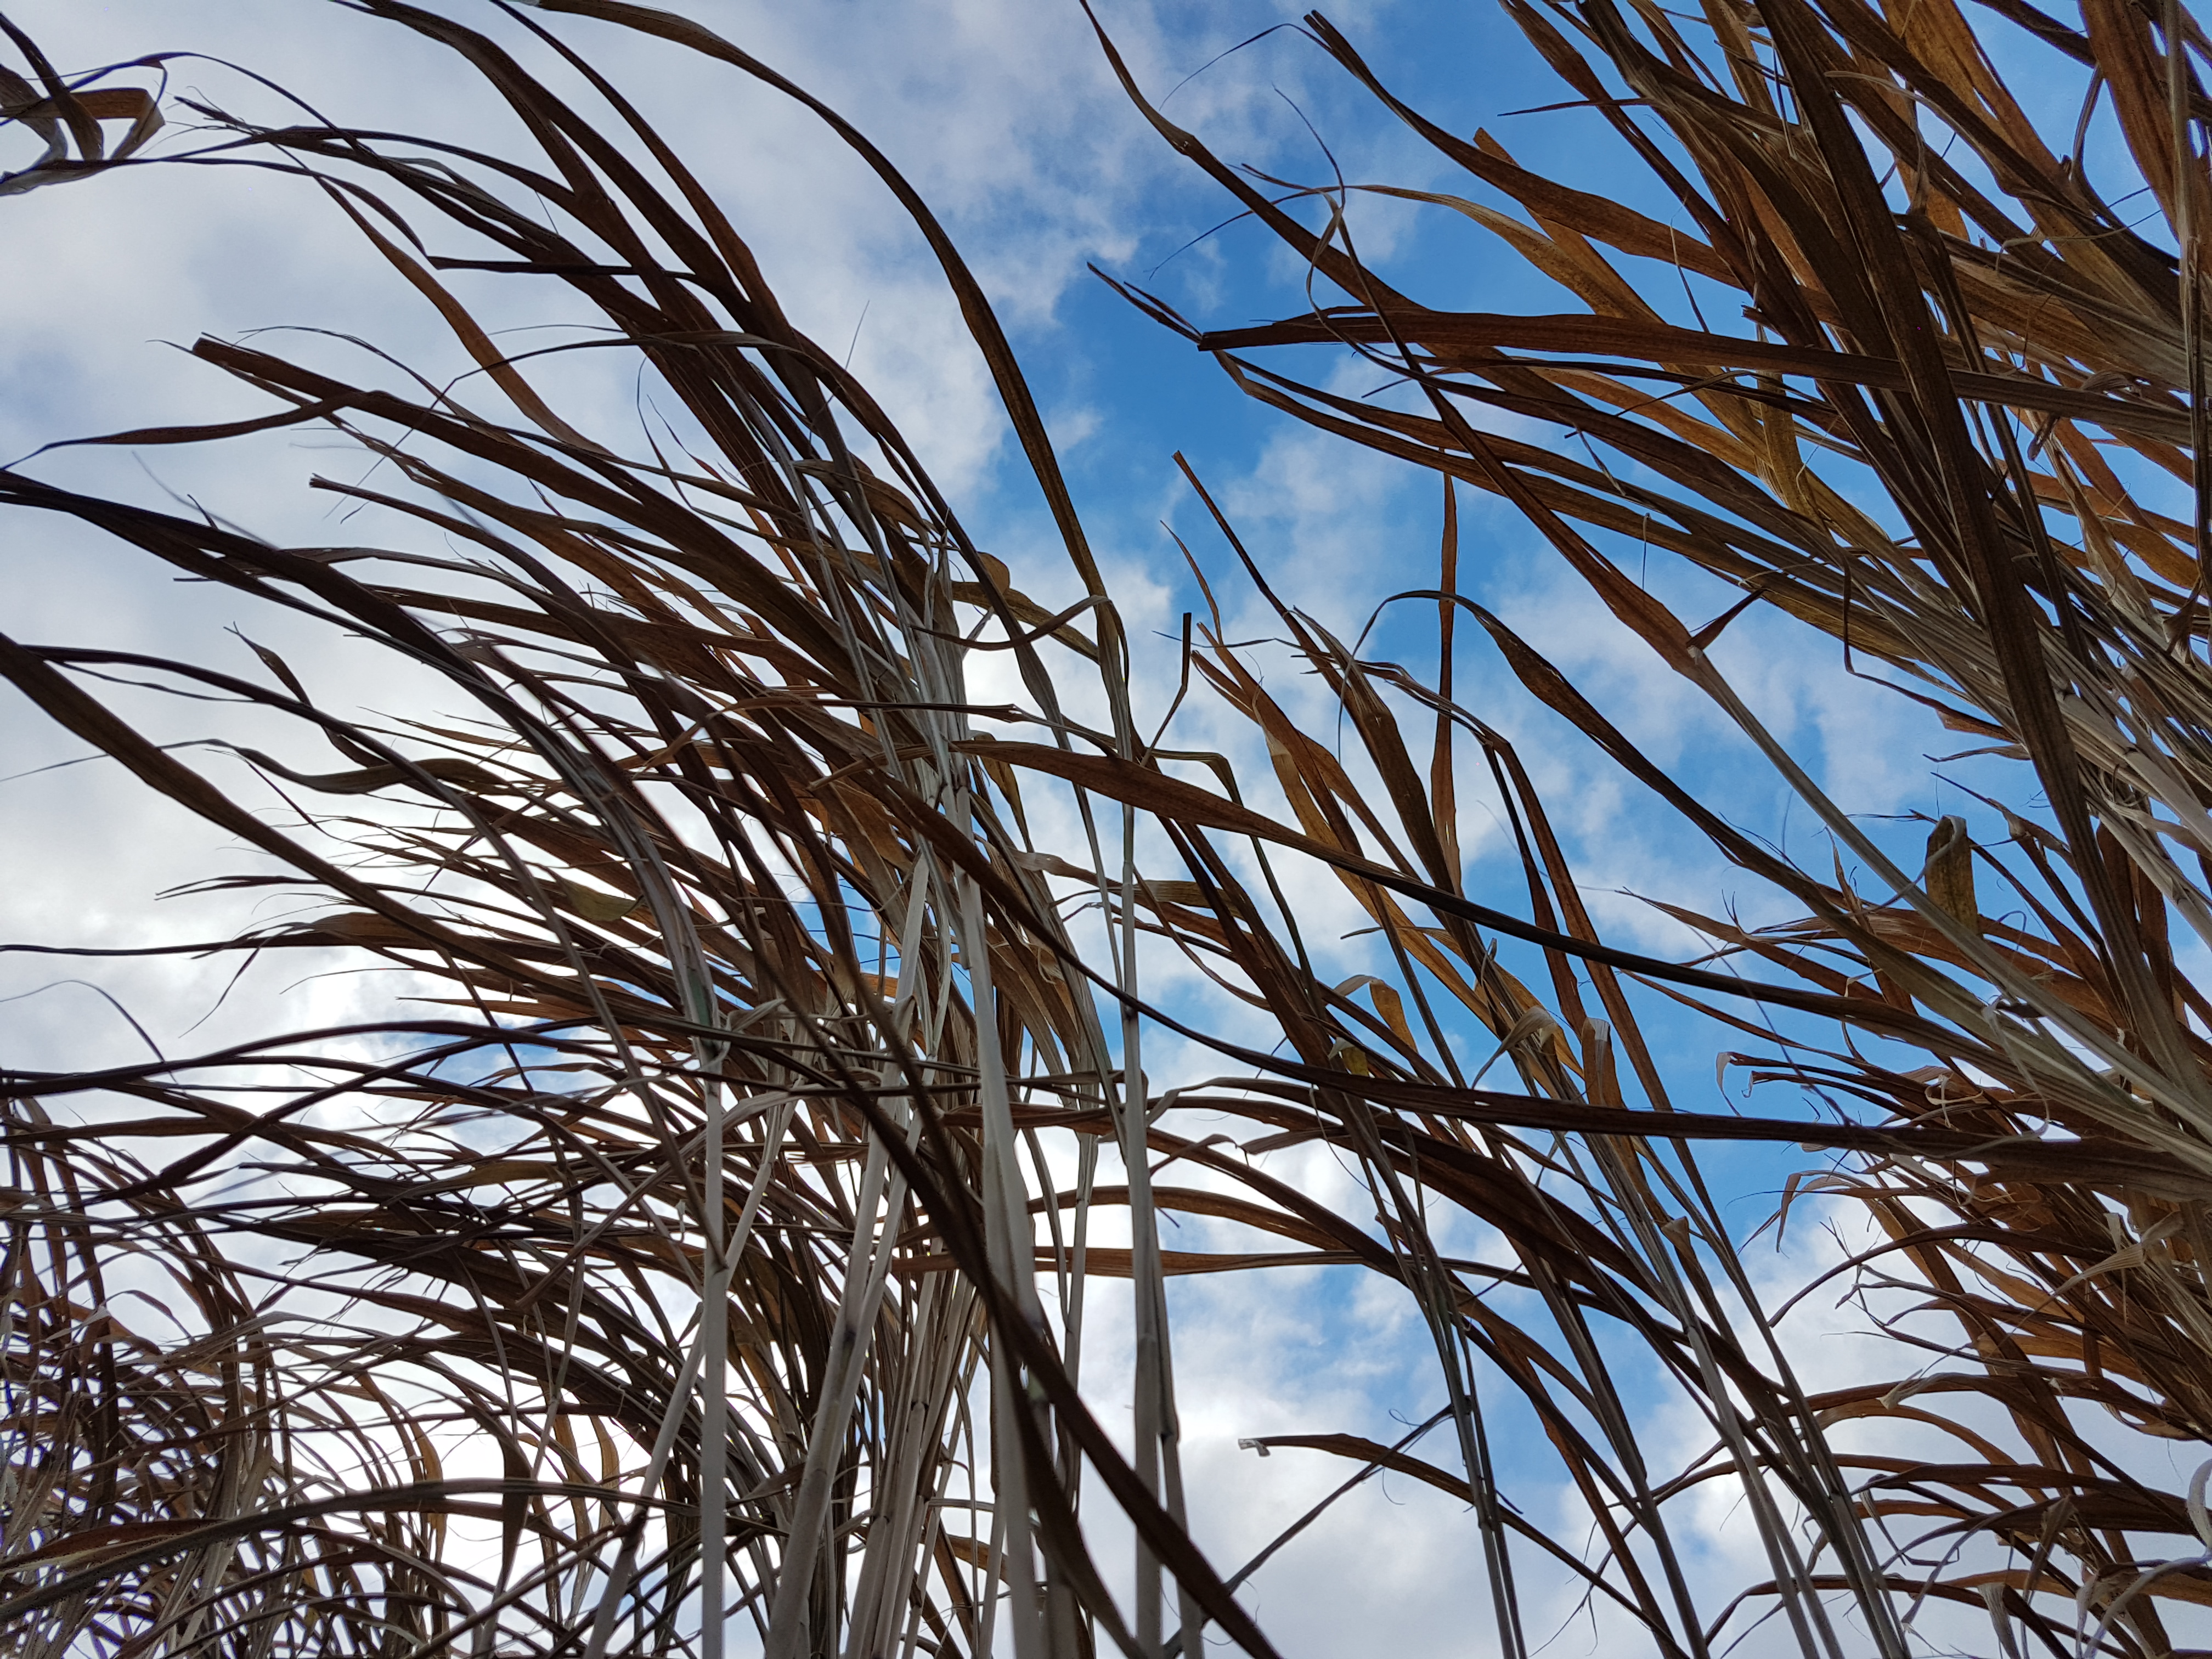 Image of grass with sky in background